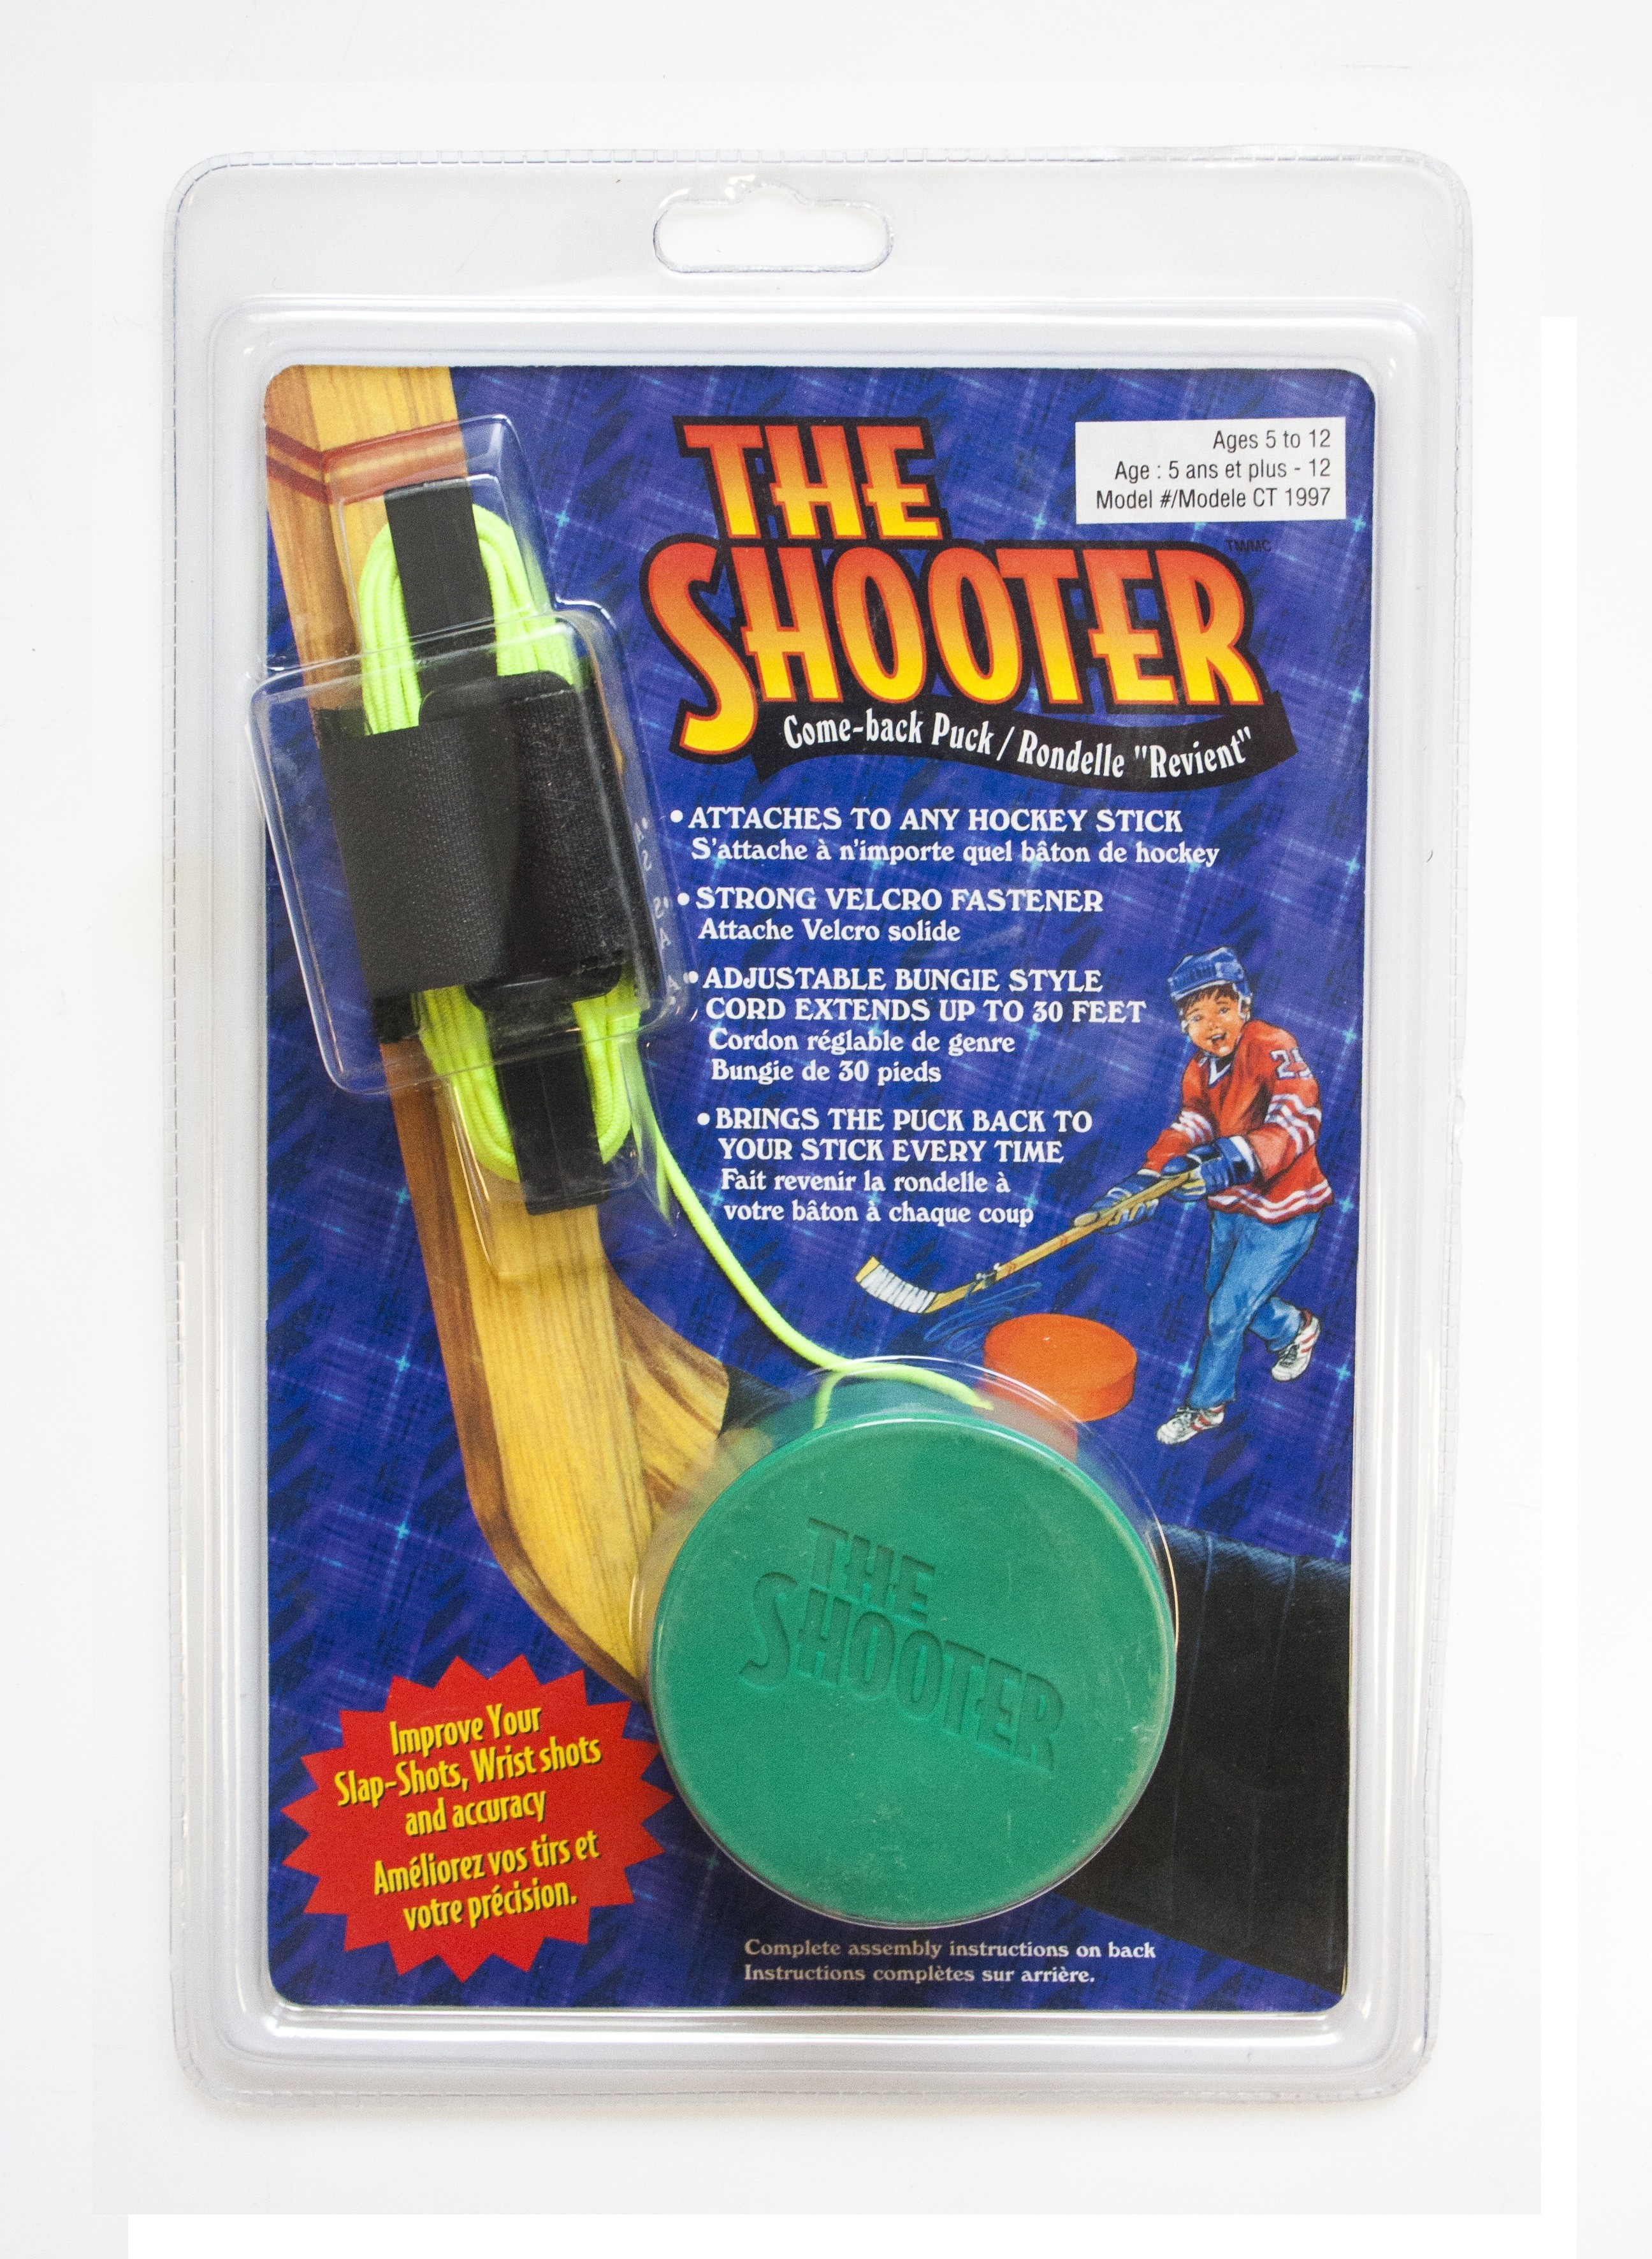 THE SHOOTER Come Back Puck Training Equipment